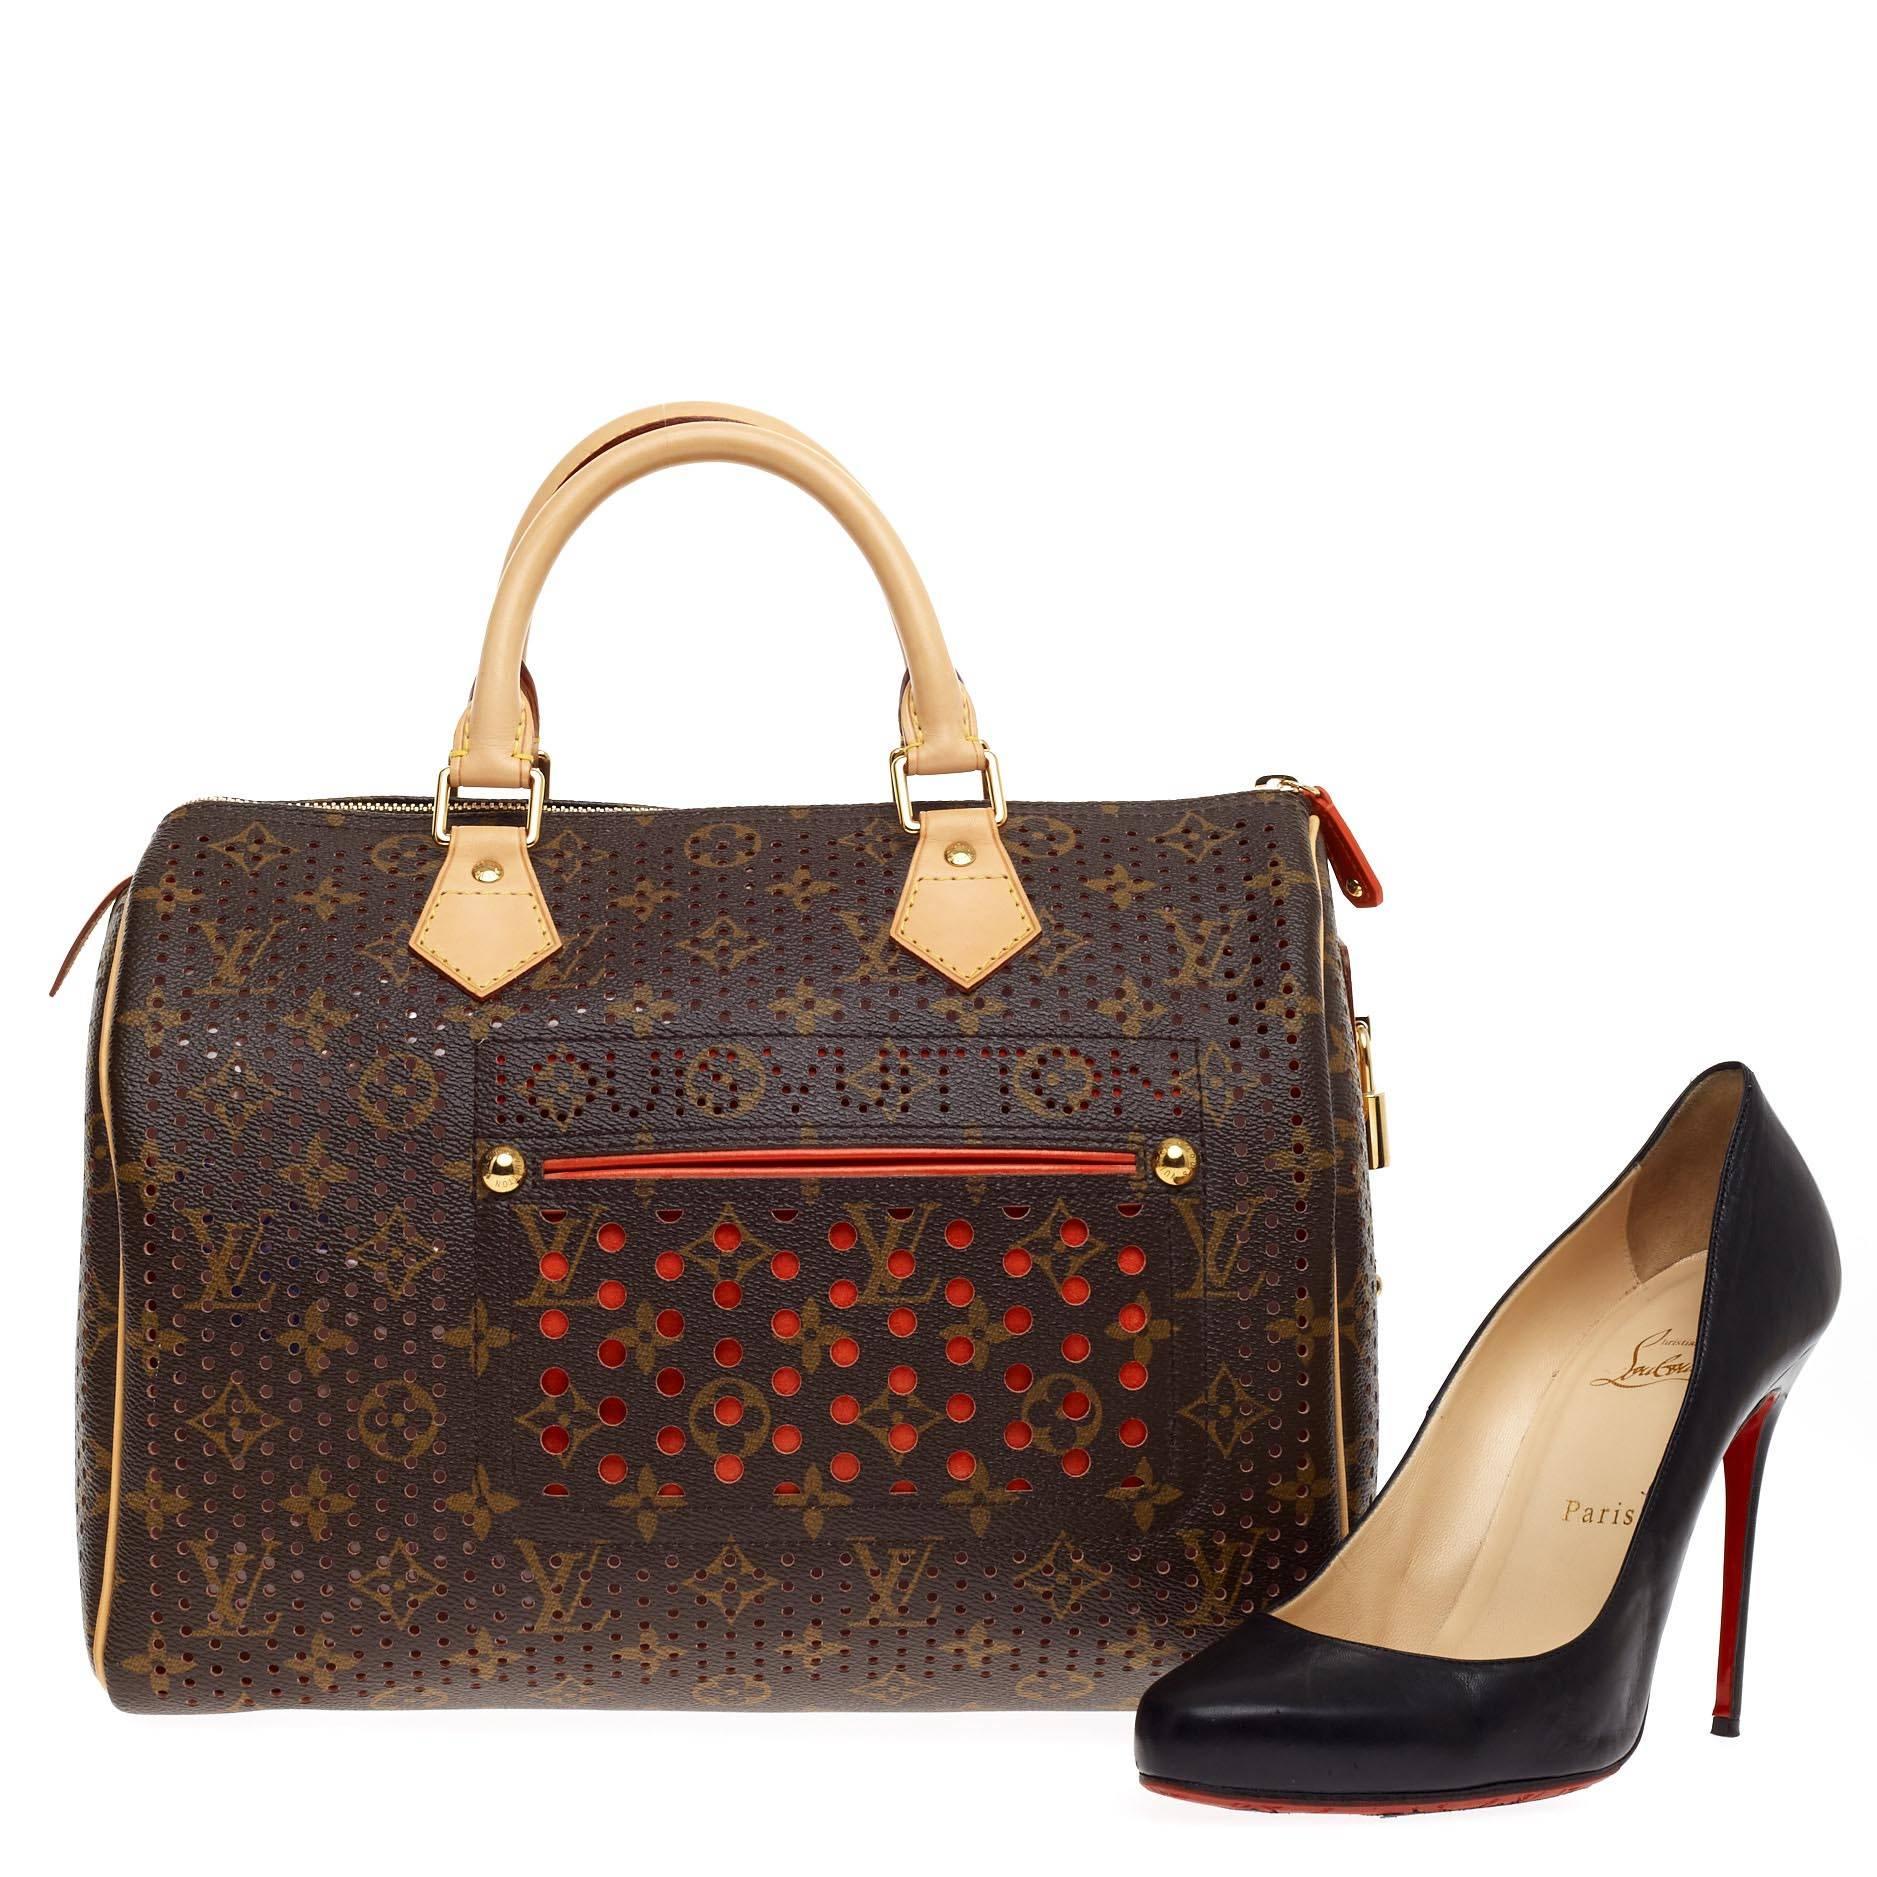 This authentic Louis Vuitton Speedy Perforated Monogram Canvas 30 from the brand's monogram perfo collection is a must-have addition for any Louis Vuitton lover. Constructed from iconic brown perforated monogram printed canvas with stand-out bright